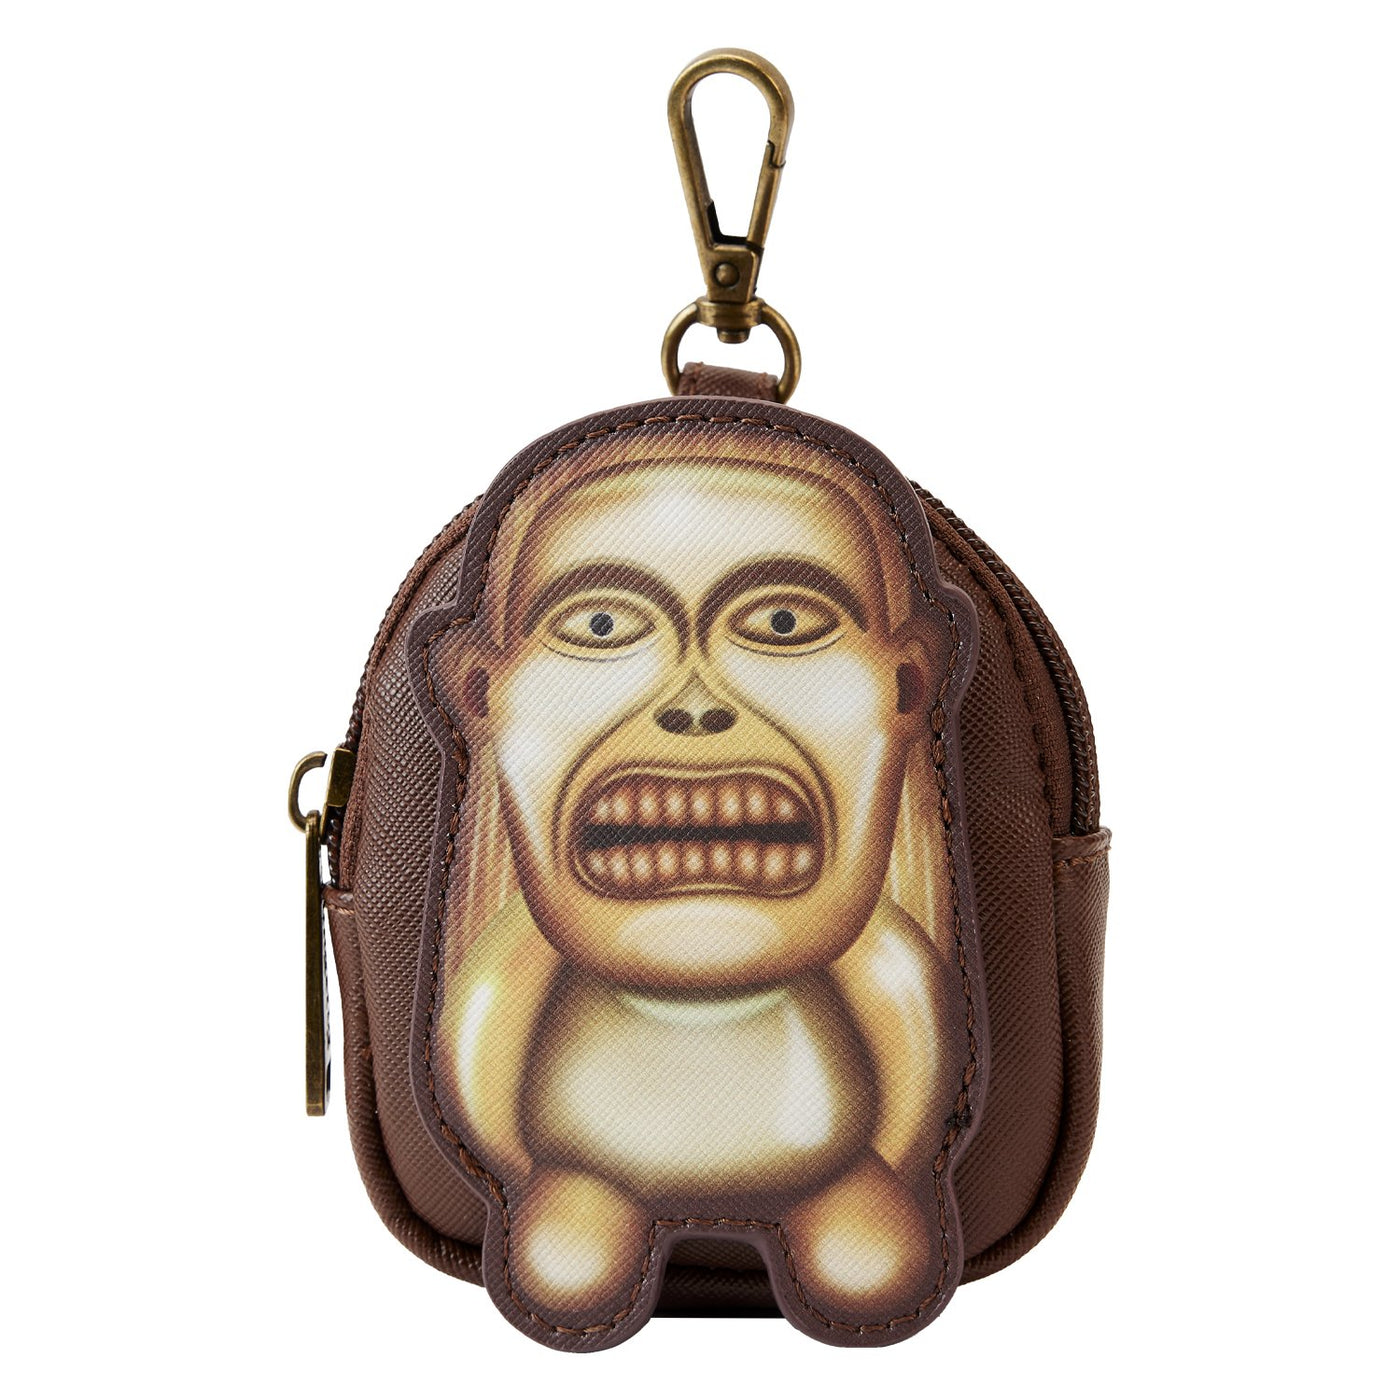 671803418424 - Loungefly Indiana Jones Raiders Mini Backpack with Coin Purse - Detachable Coin Purse